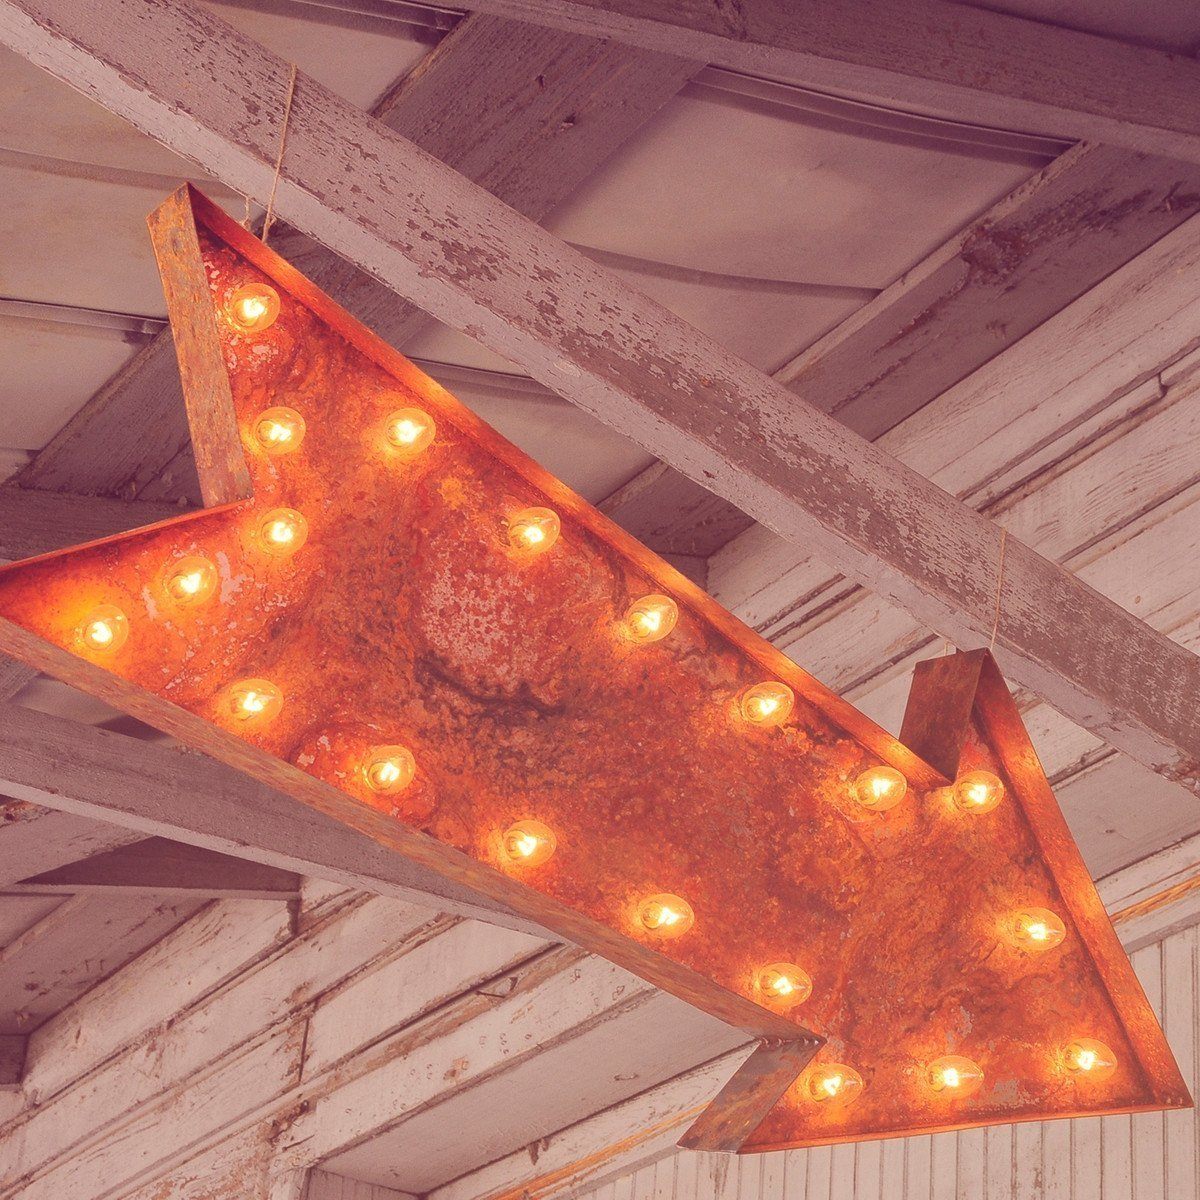 36” Large Arrow Lights Online Lights - Vintage (Rustic) Marquee Marquee - The Buy Marquee Rusty with Sign